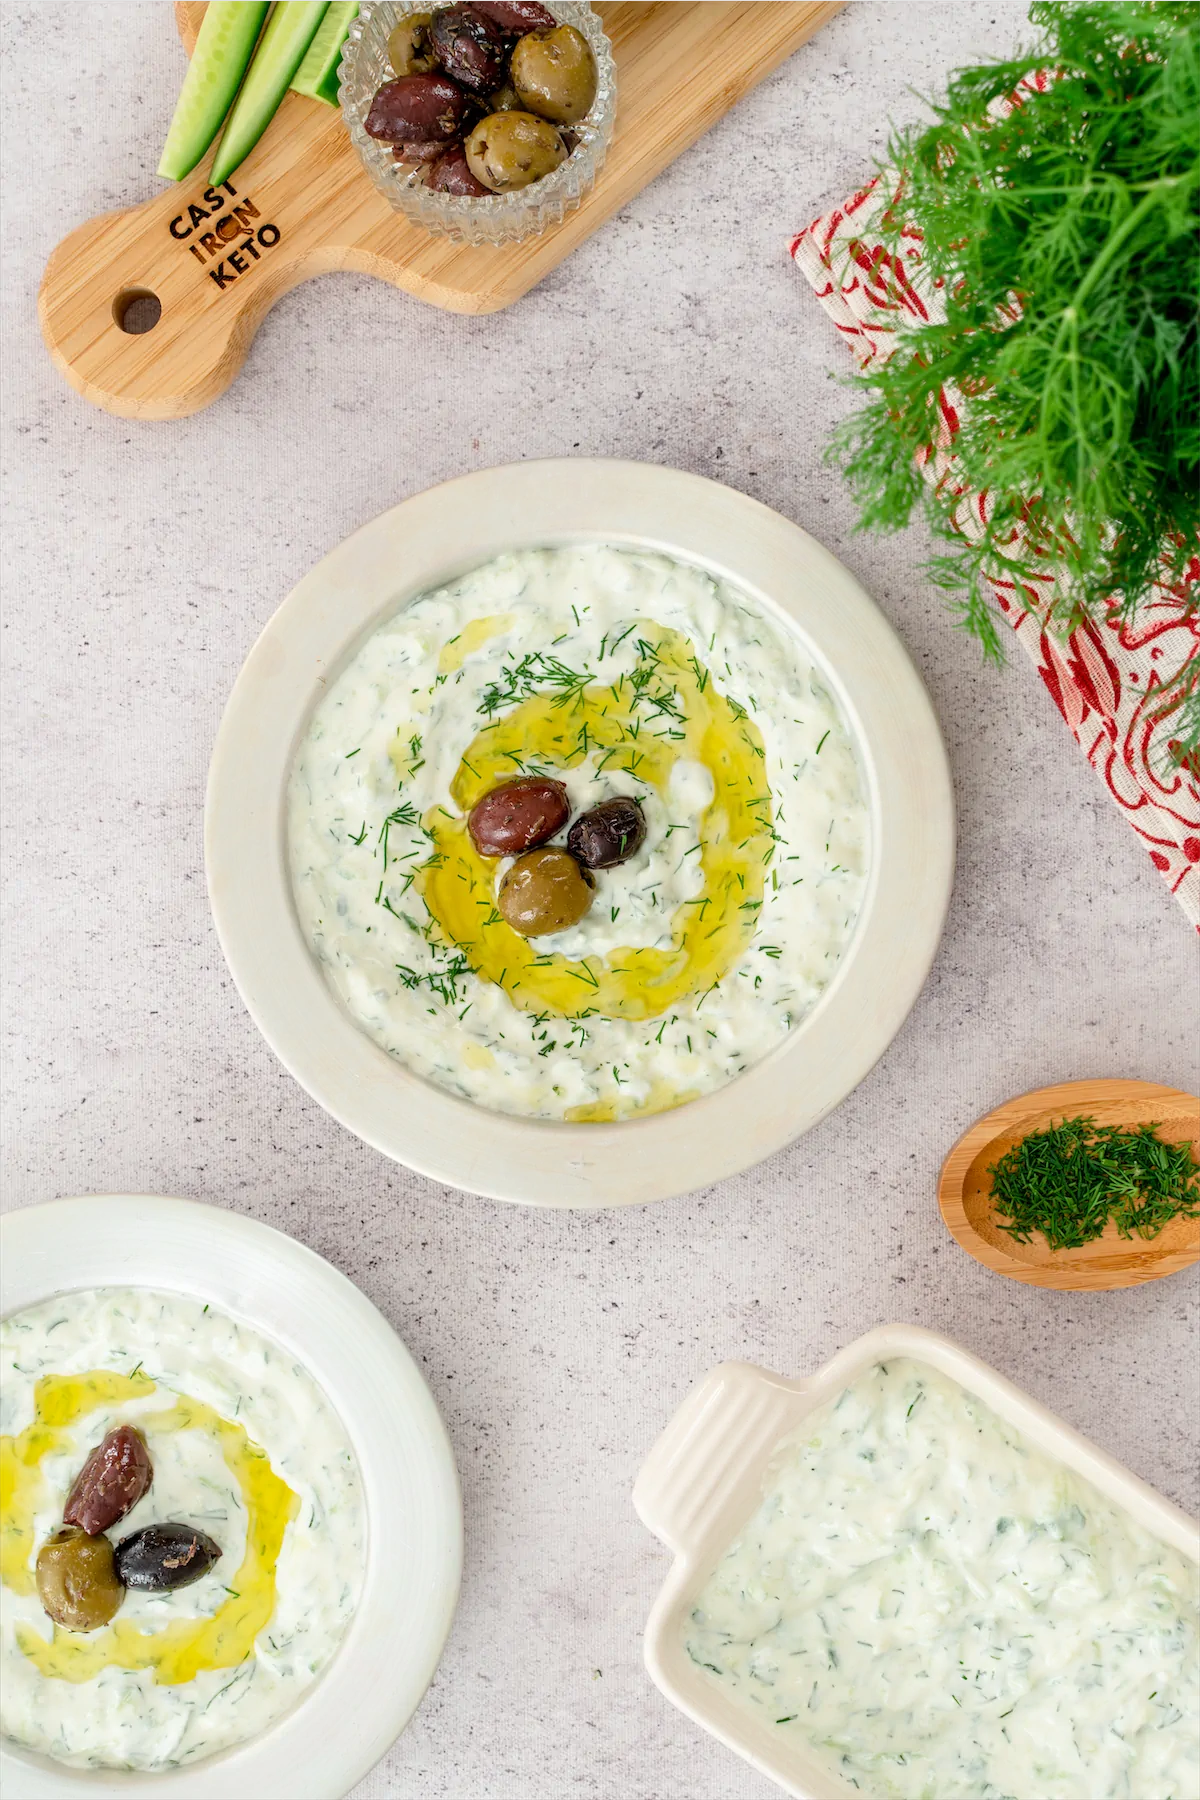 A visually appealing keto tzatziki recipe including olives, showcased on a white plate.